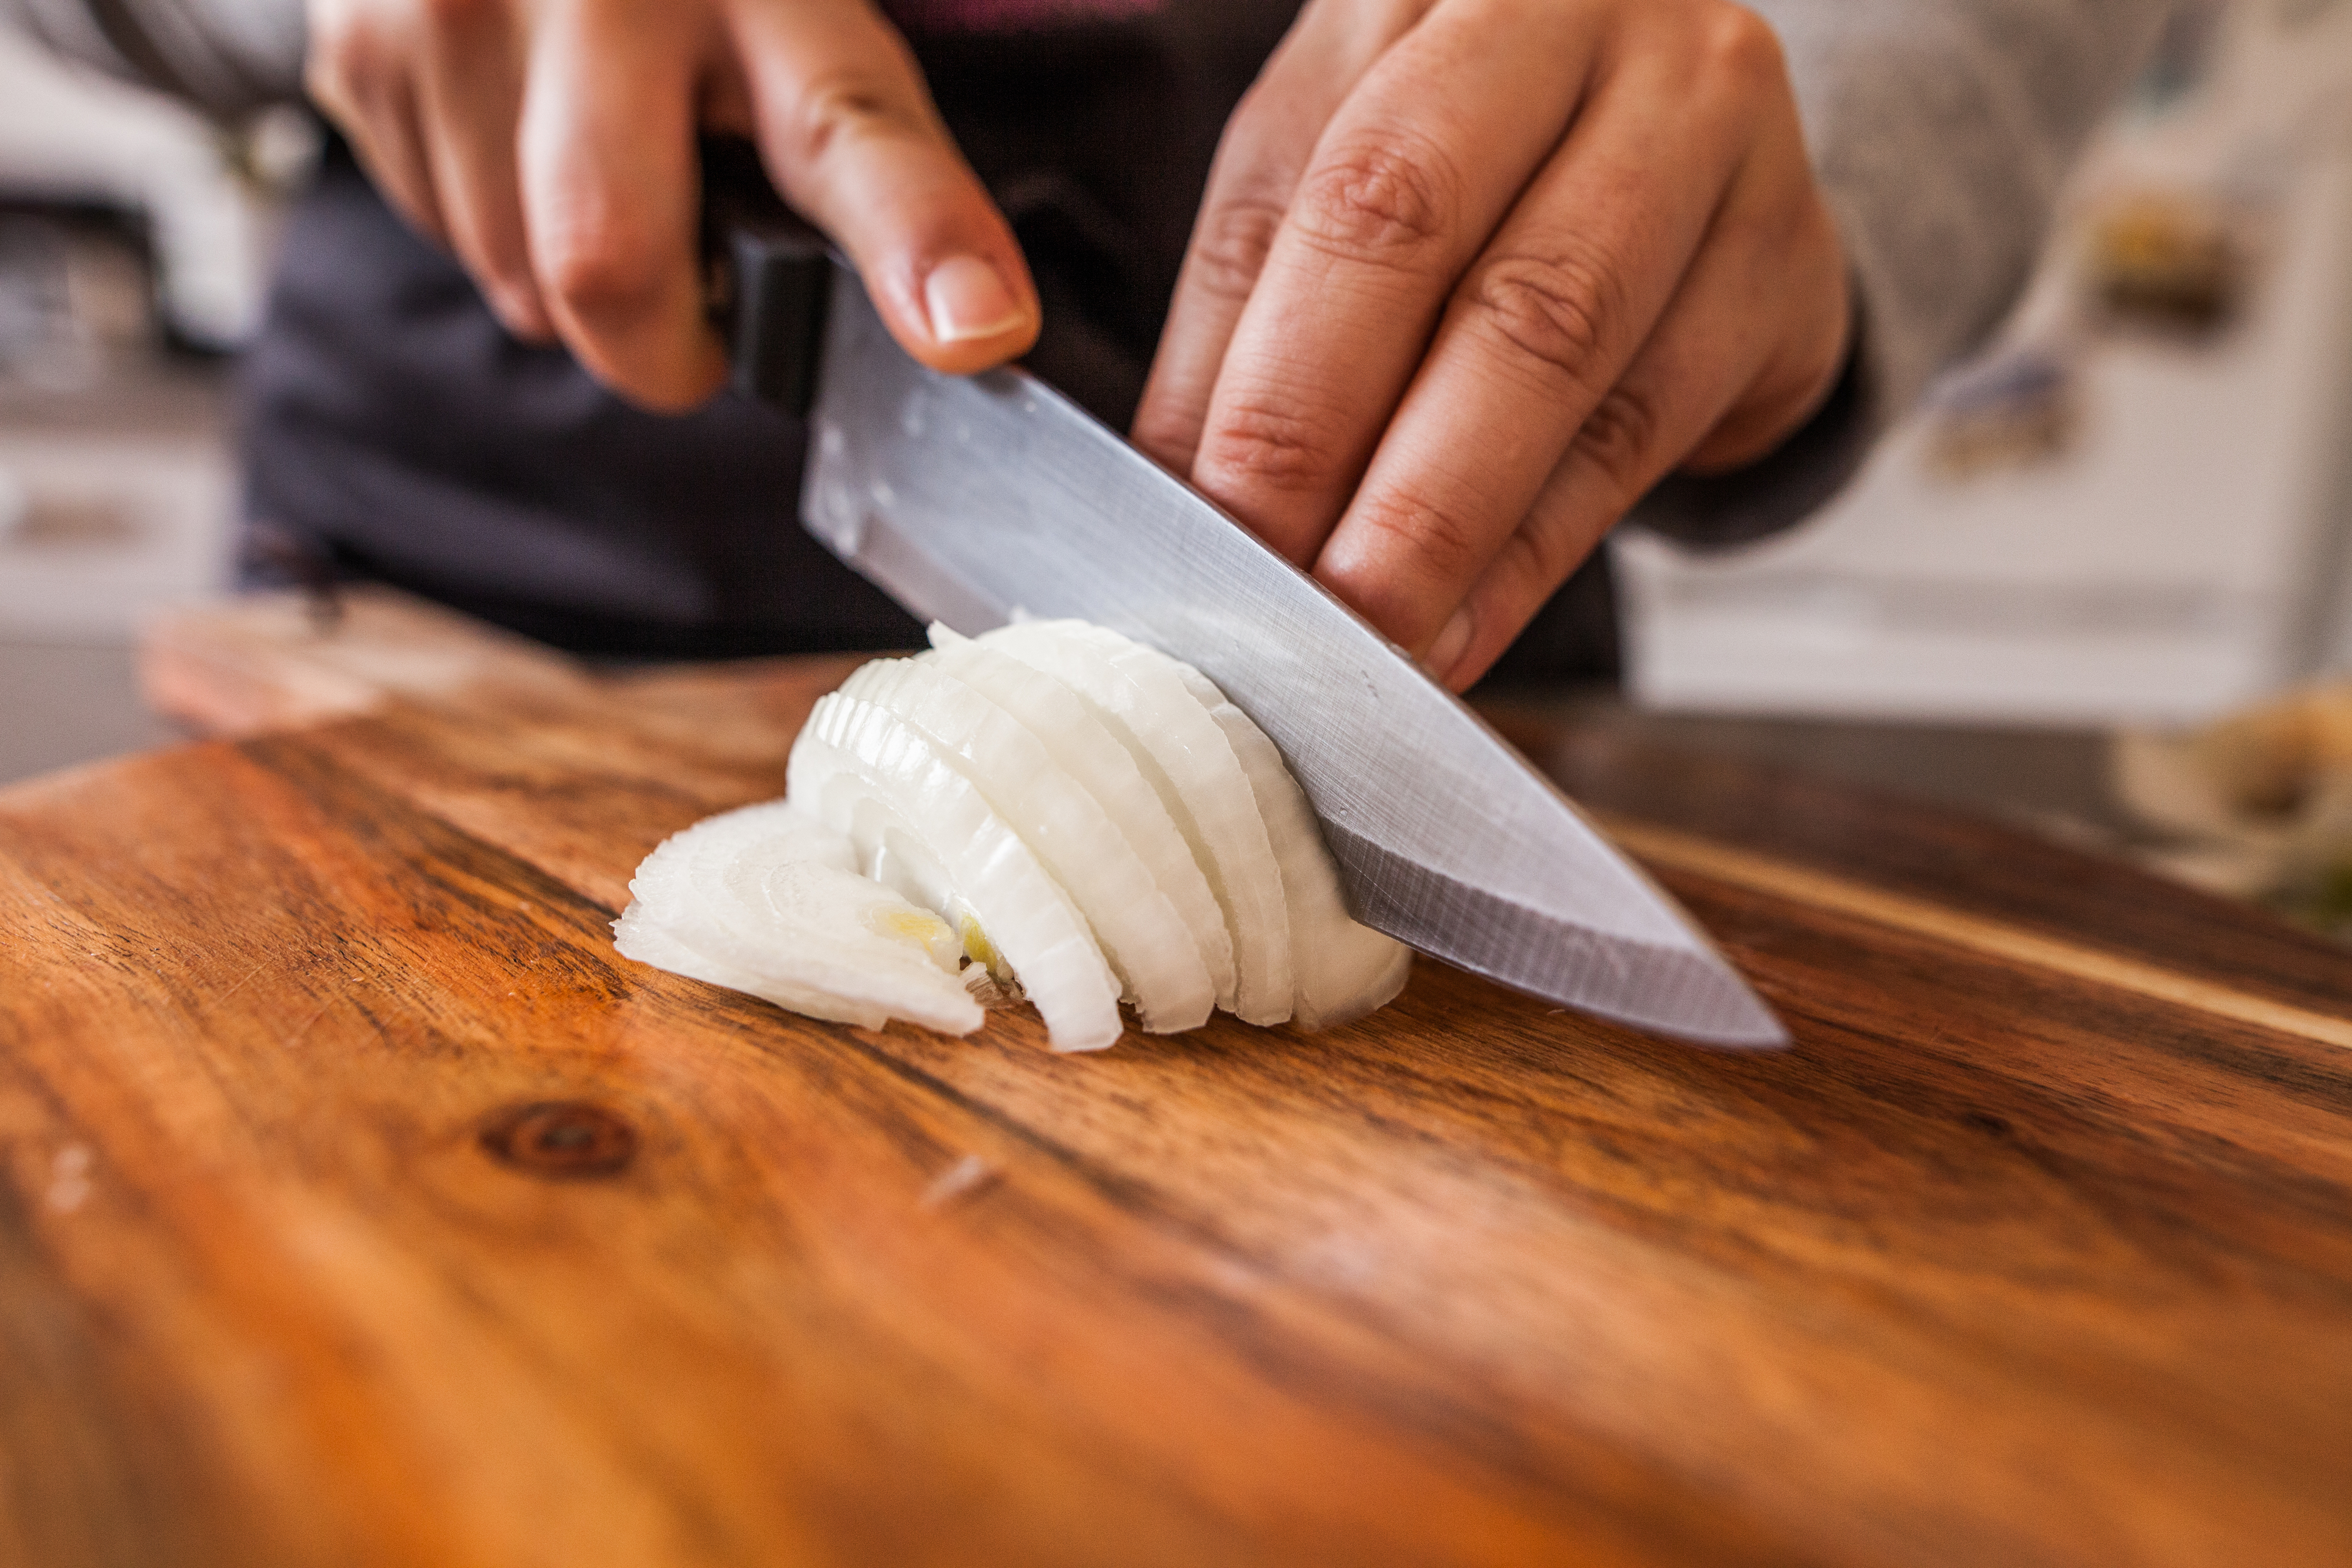 Person slicing an onion on a wooden board, demonstrating food prep skills essential in culinary jobs